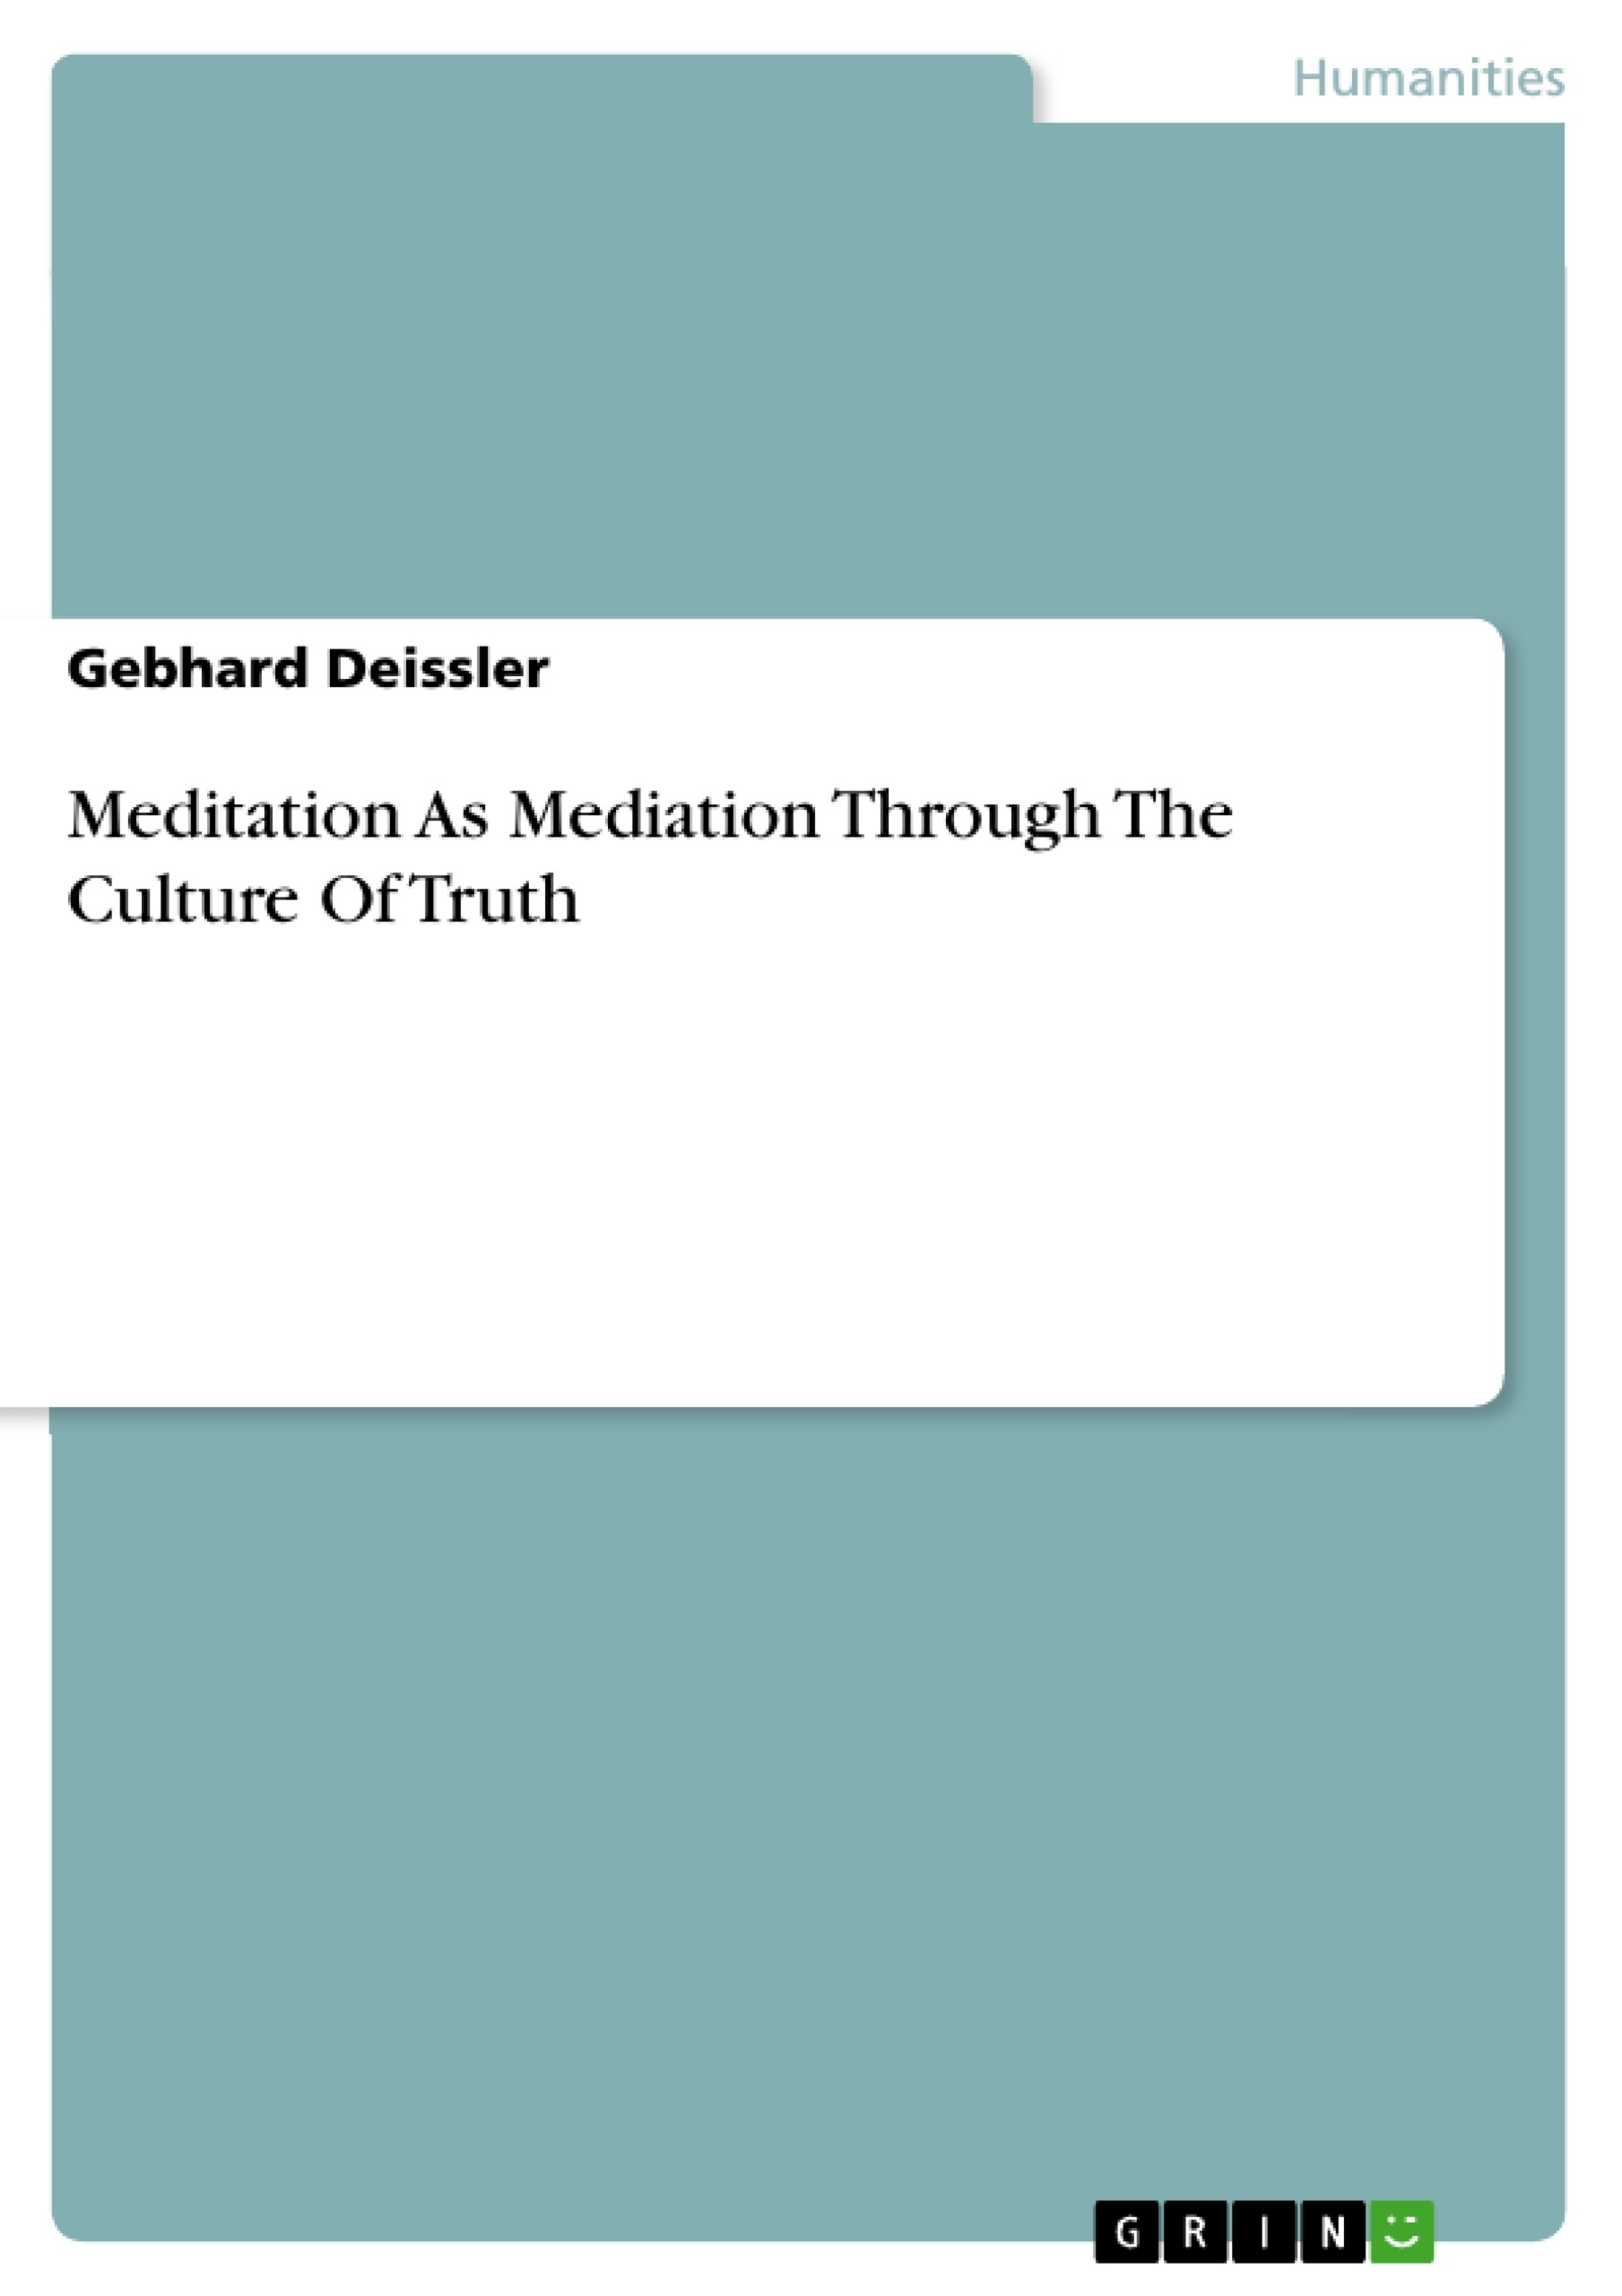 Title: Meditation As Mediation Through The Culture Of Truth